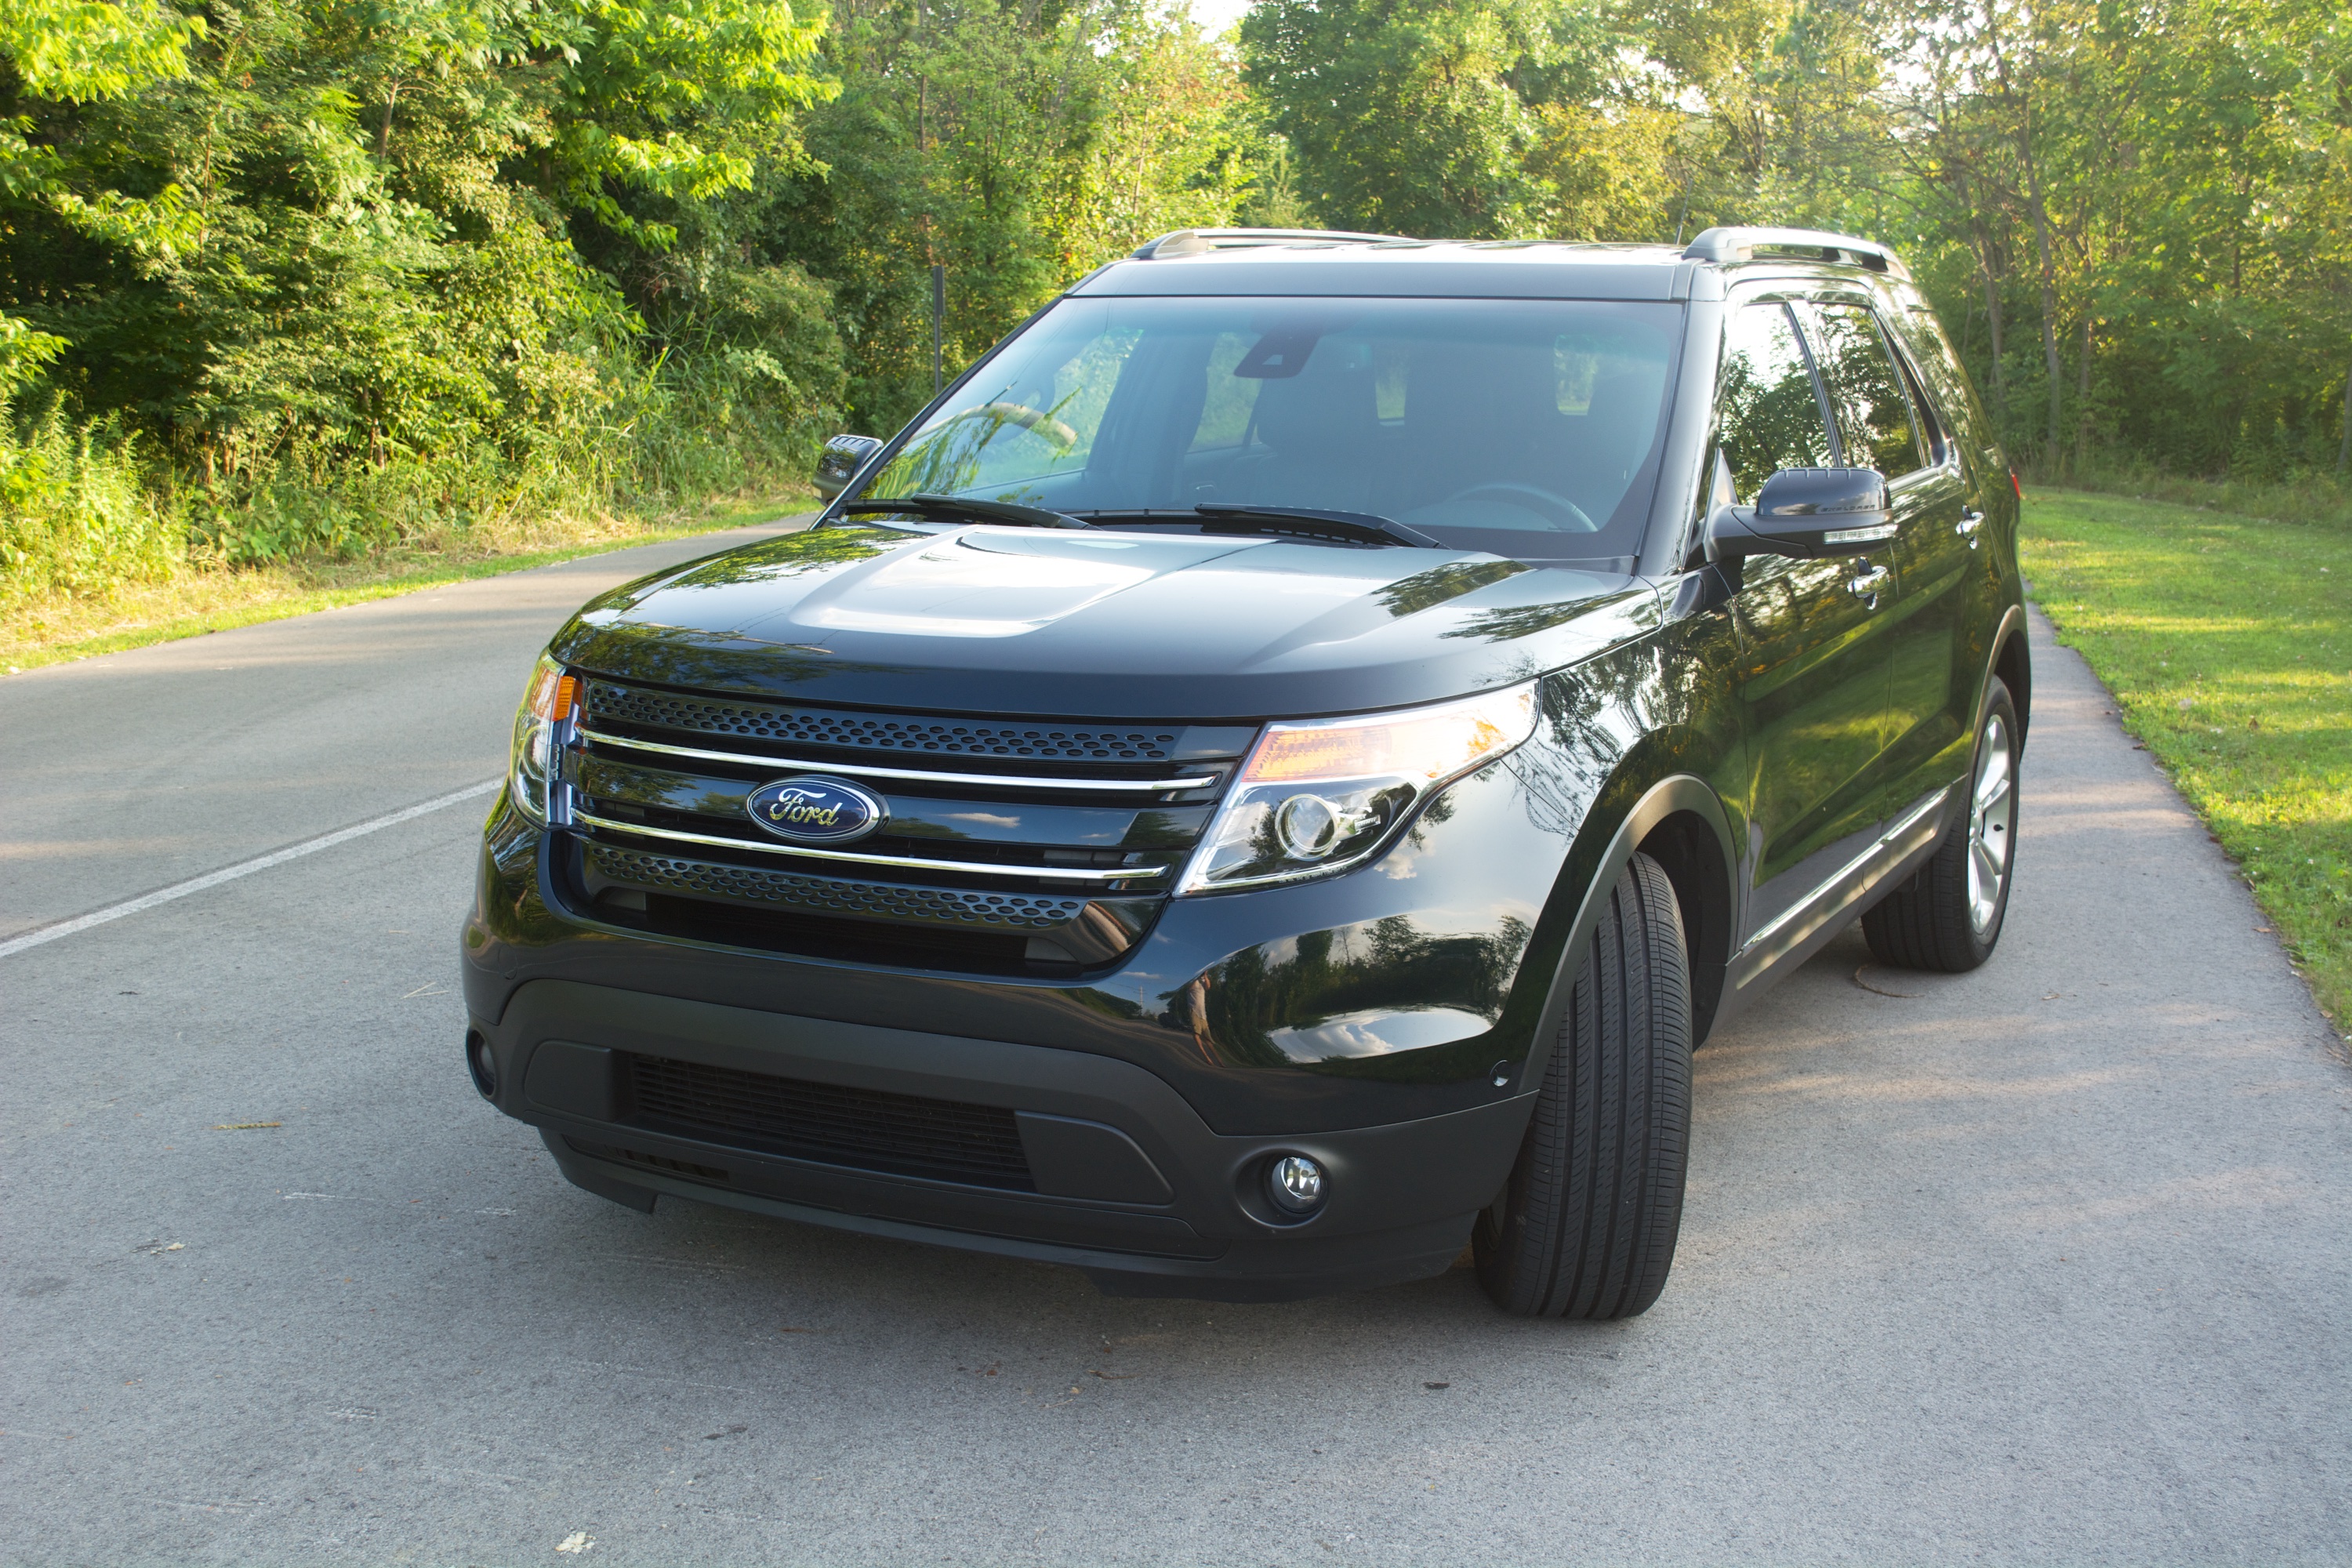 Reviews of 2014 ford explorer limited #5